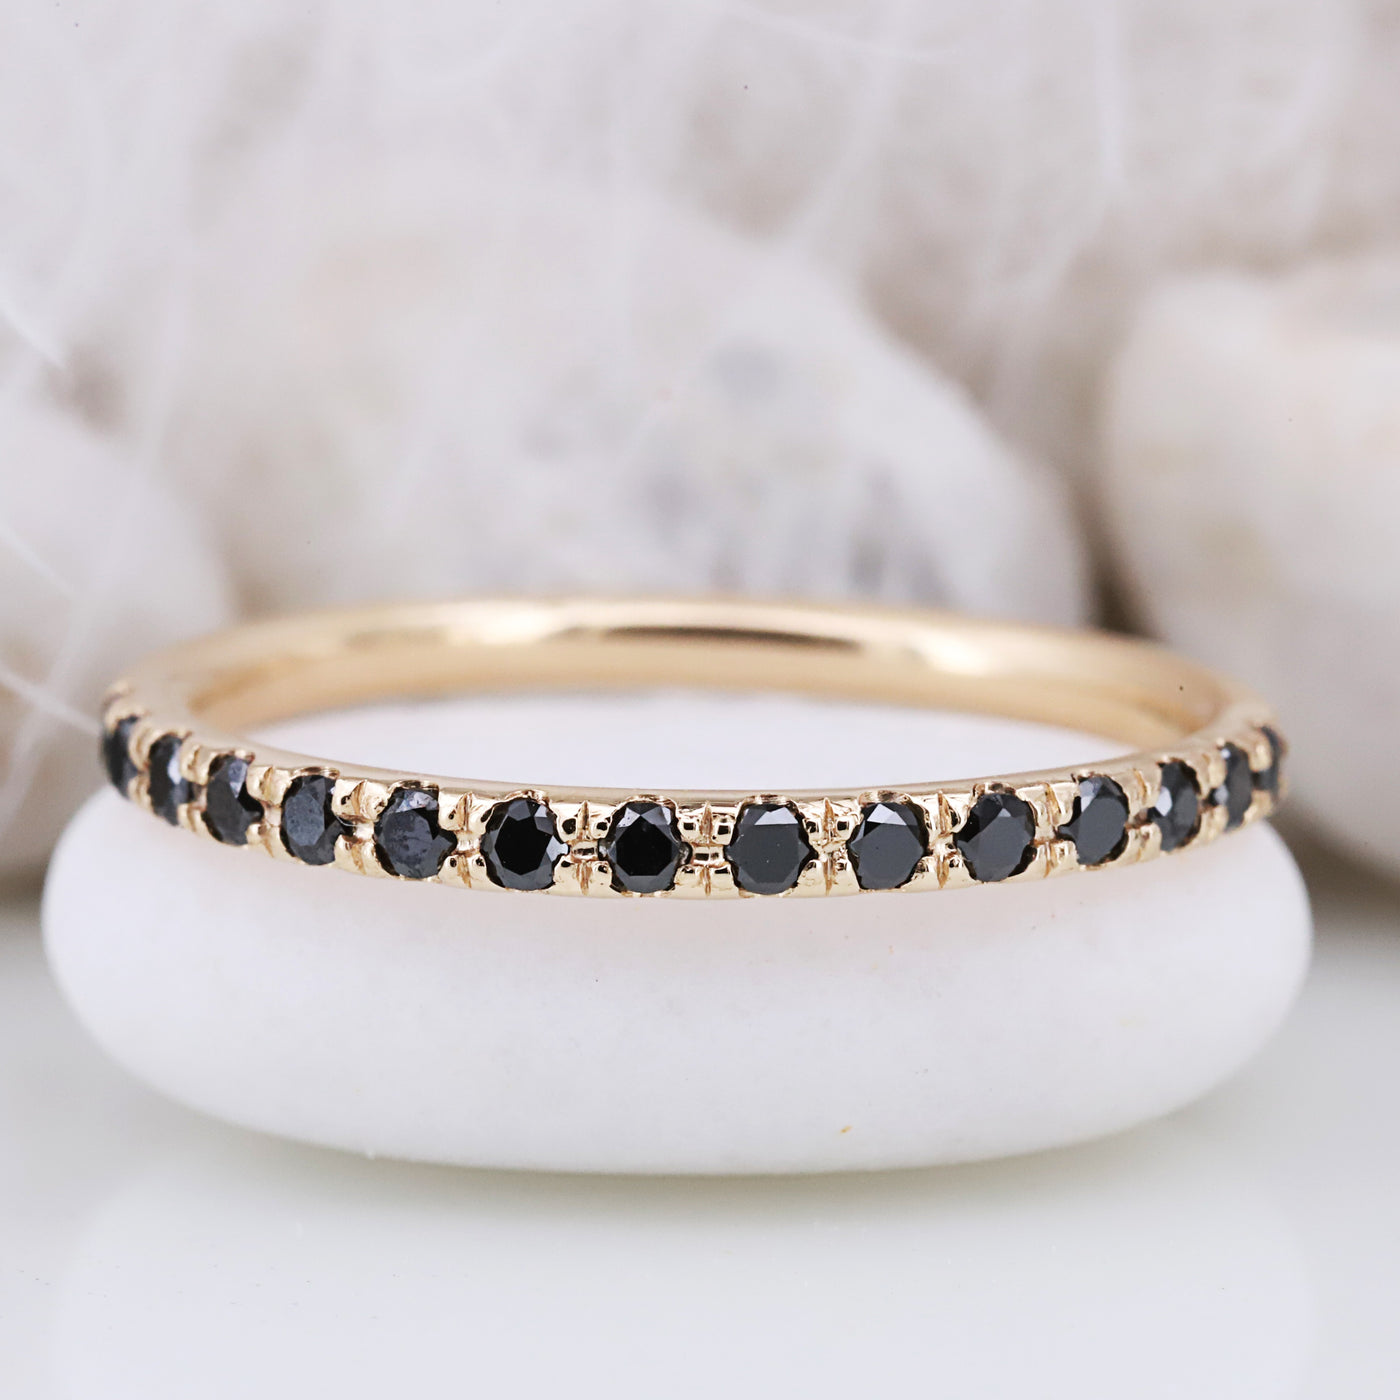 Gorgeous Natural Round Shaped Black Diamond Ring - A Perfect Blend of Classic and Contemporary Design